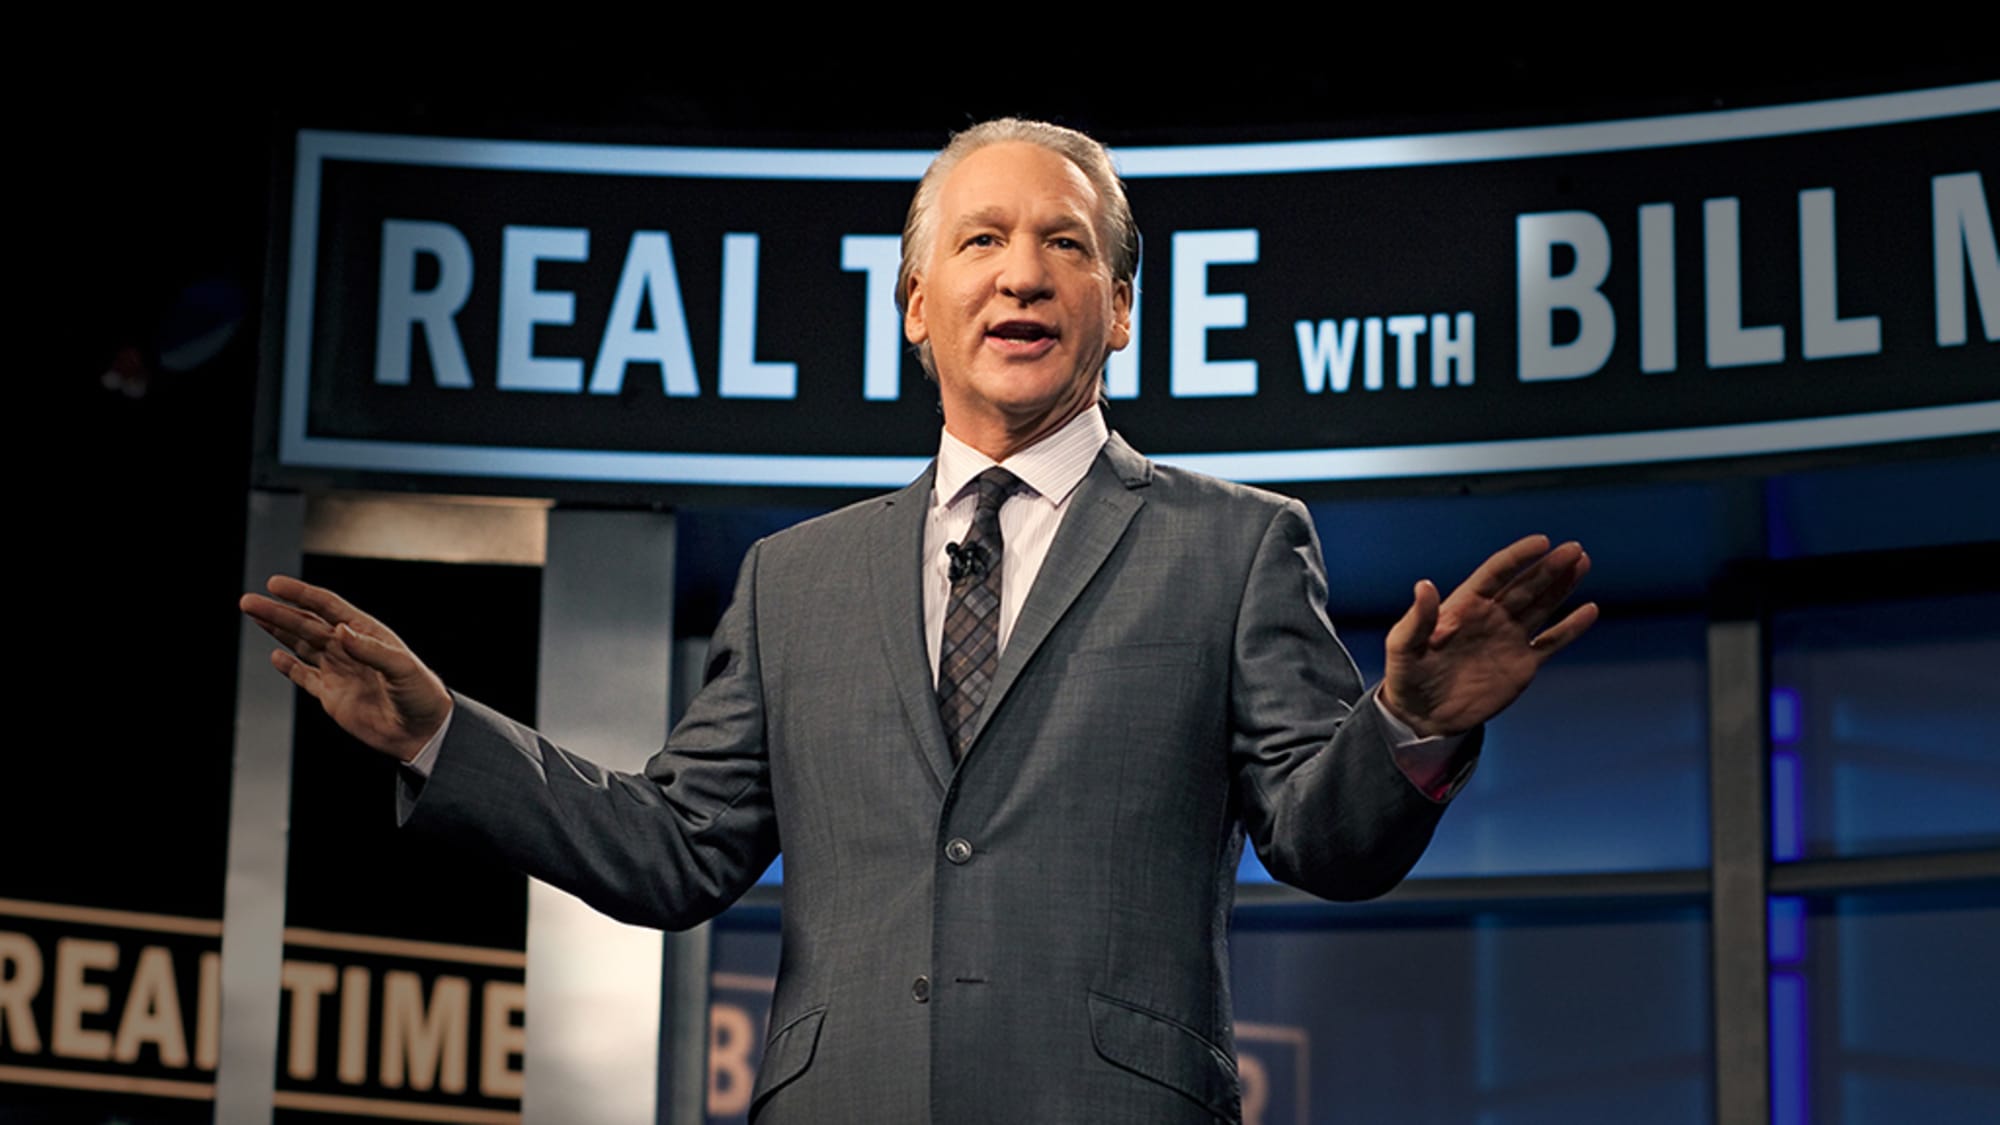 Real Time with Bill Maher live stream Watch February 17th episode online